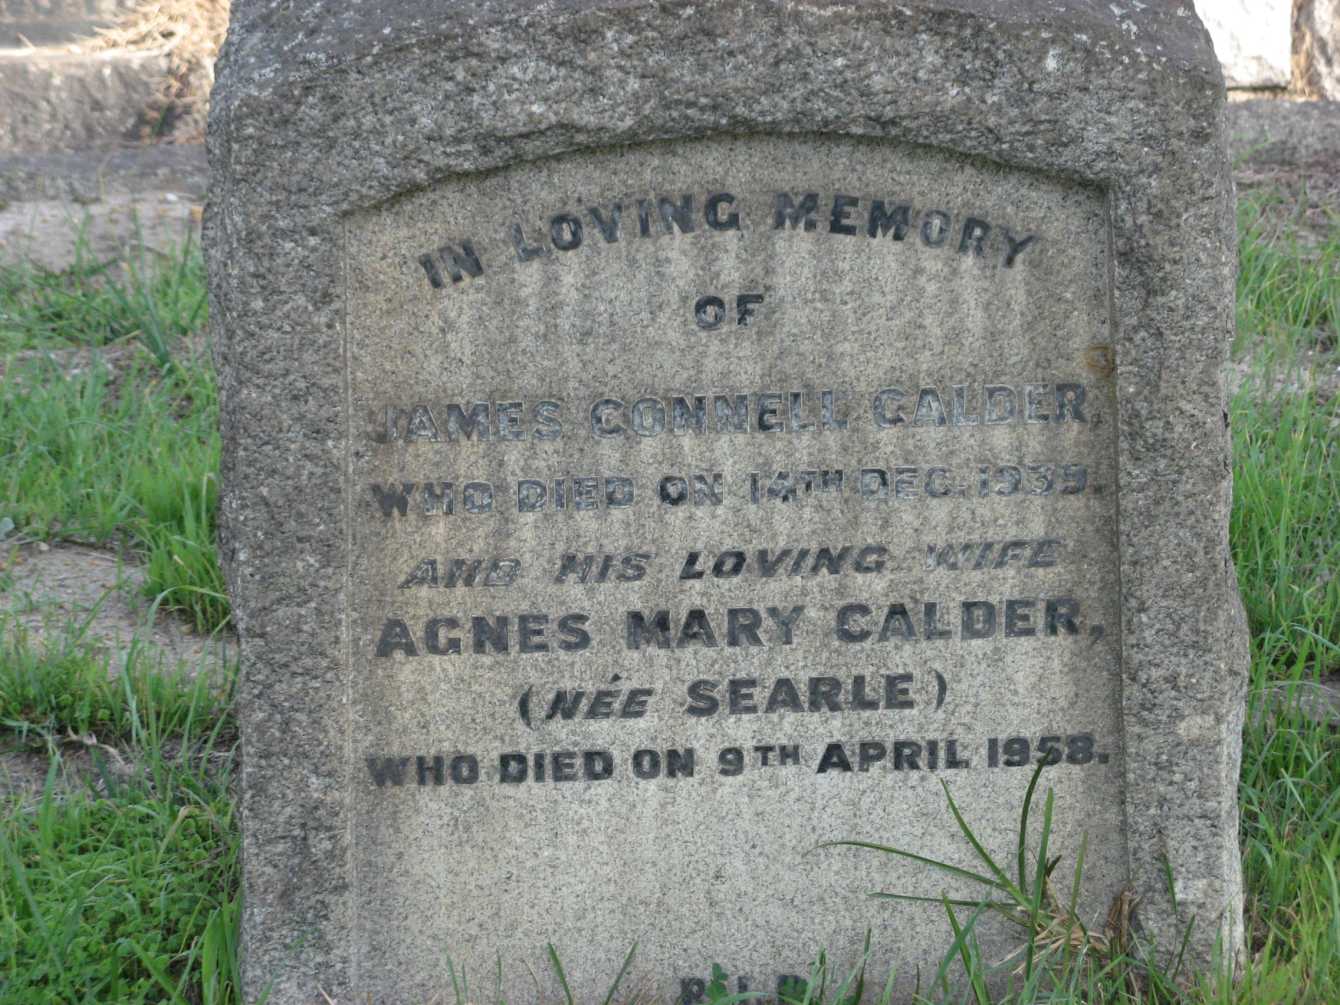 CALDER James Connell -1939 & Agnes Mary SEARLE -1958